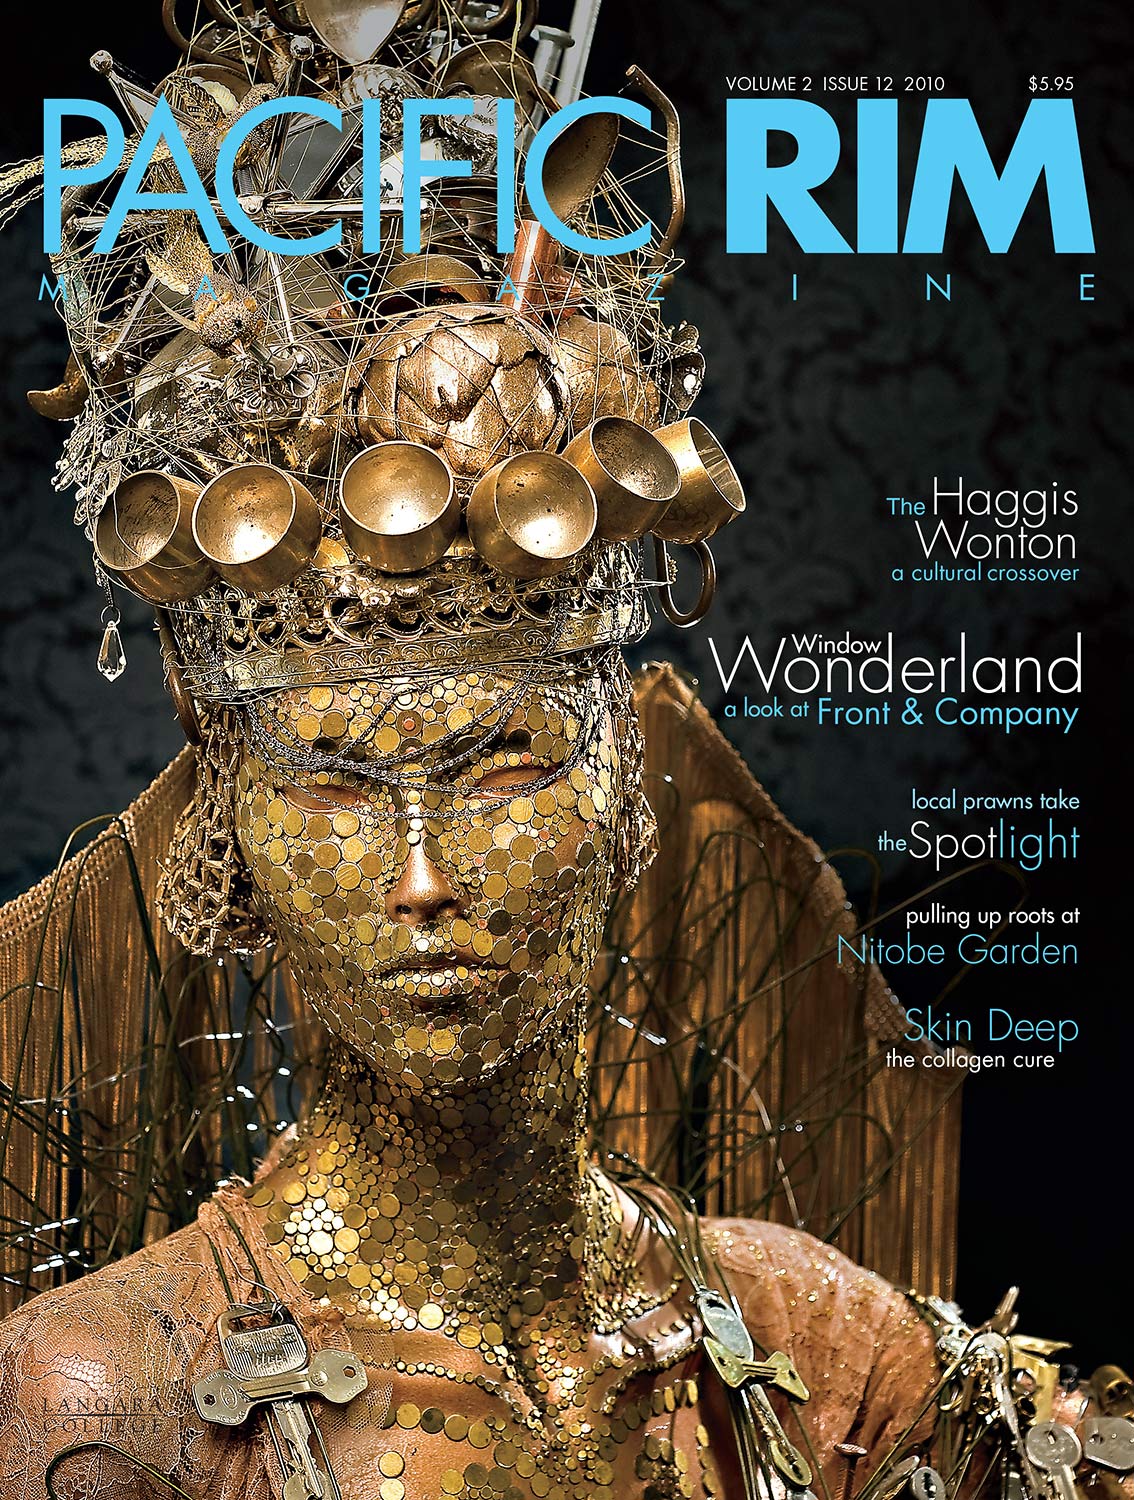 2010 Pacific Rim Cover, Image of woman covered in gold jewelry and adornments.